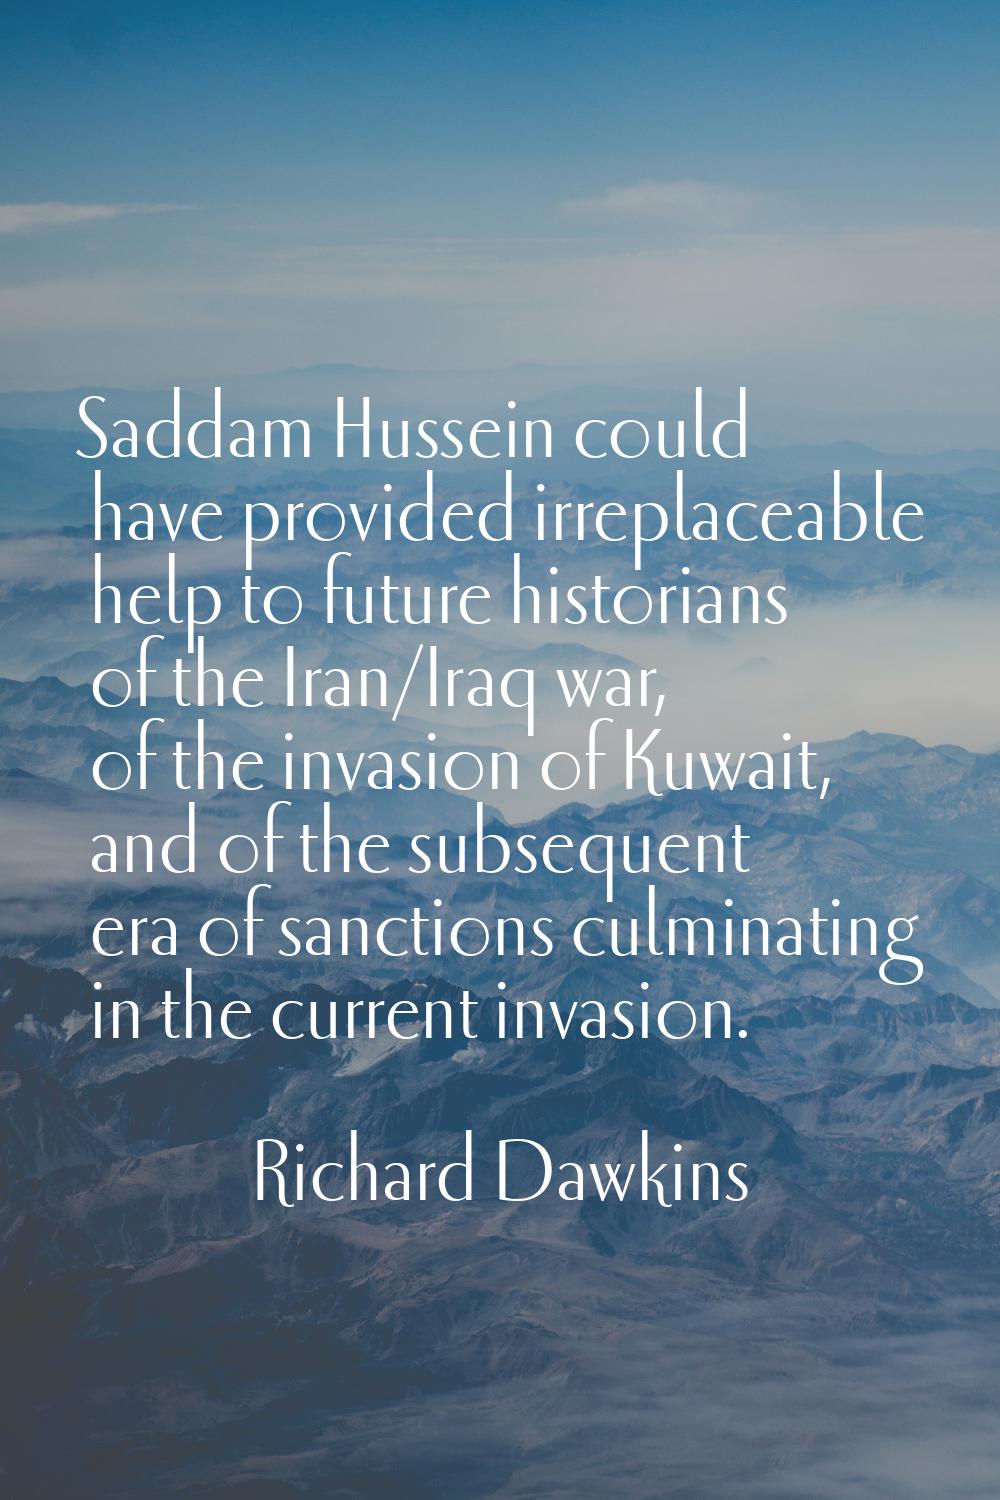 Saddam Hussein could have provided irreplaceable help to future historians of the Iran/Iraq war, of